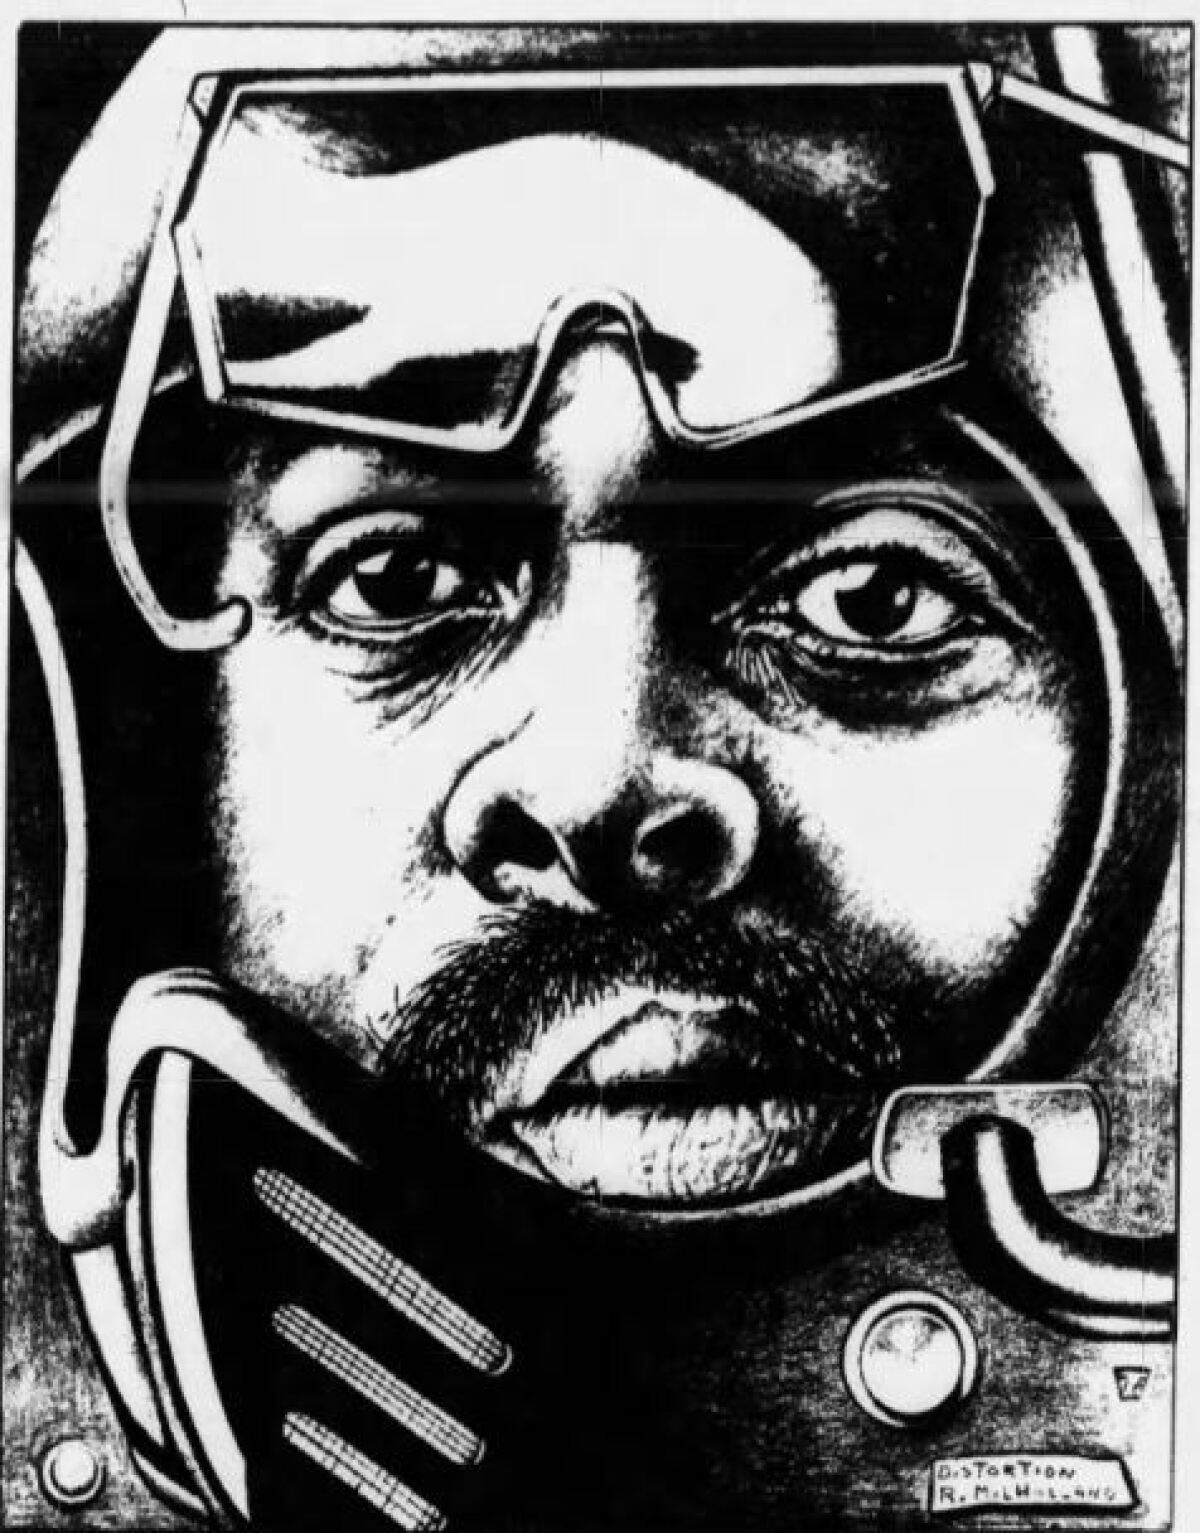 Illustration from 1982 for The Times' series "Black L.A.: Looking at Diversity."